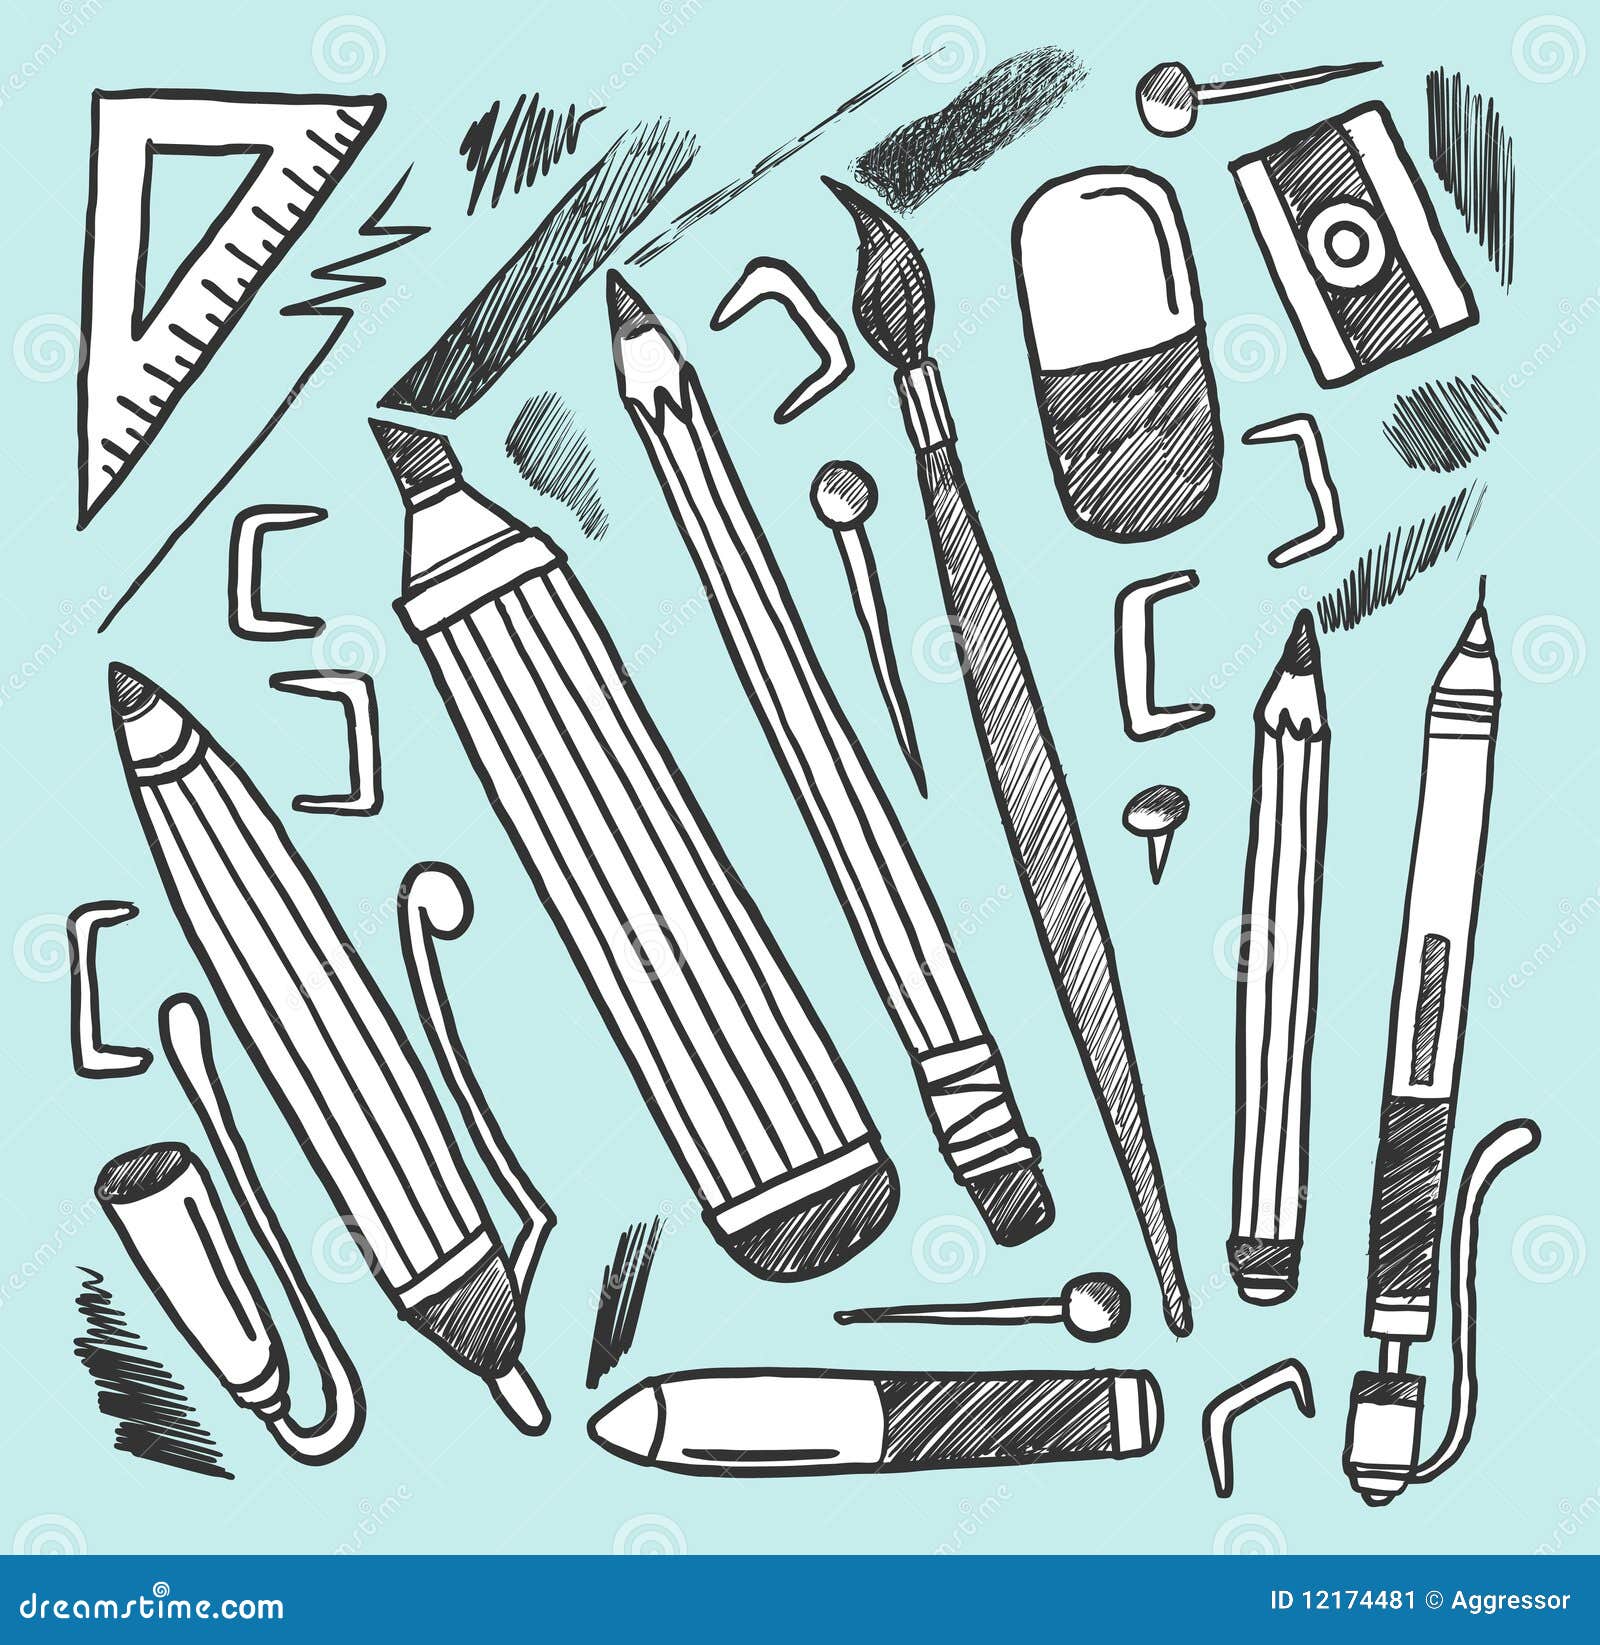 Drawing and painting tools hand drawn sketch Vector Image